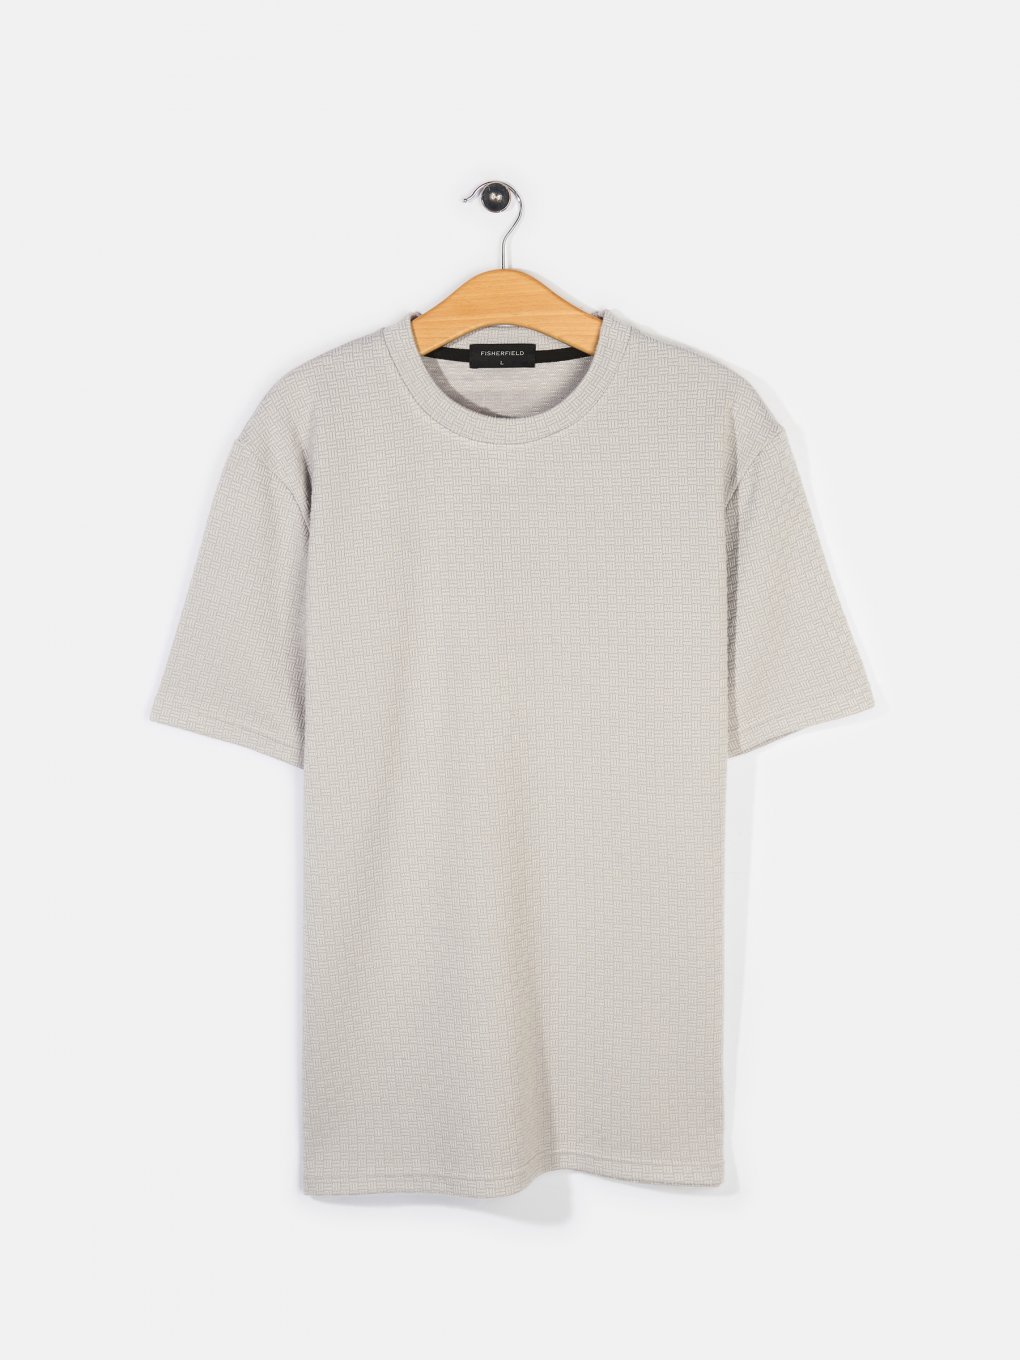 Structured t-shirt